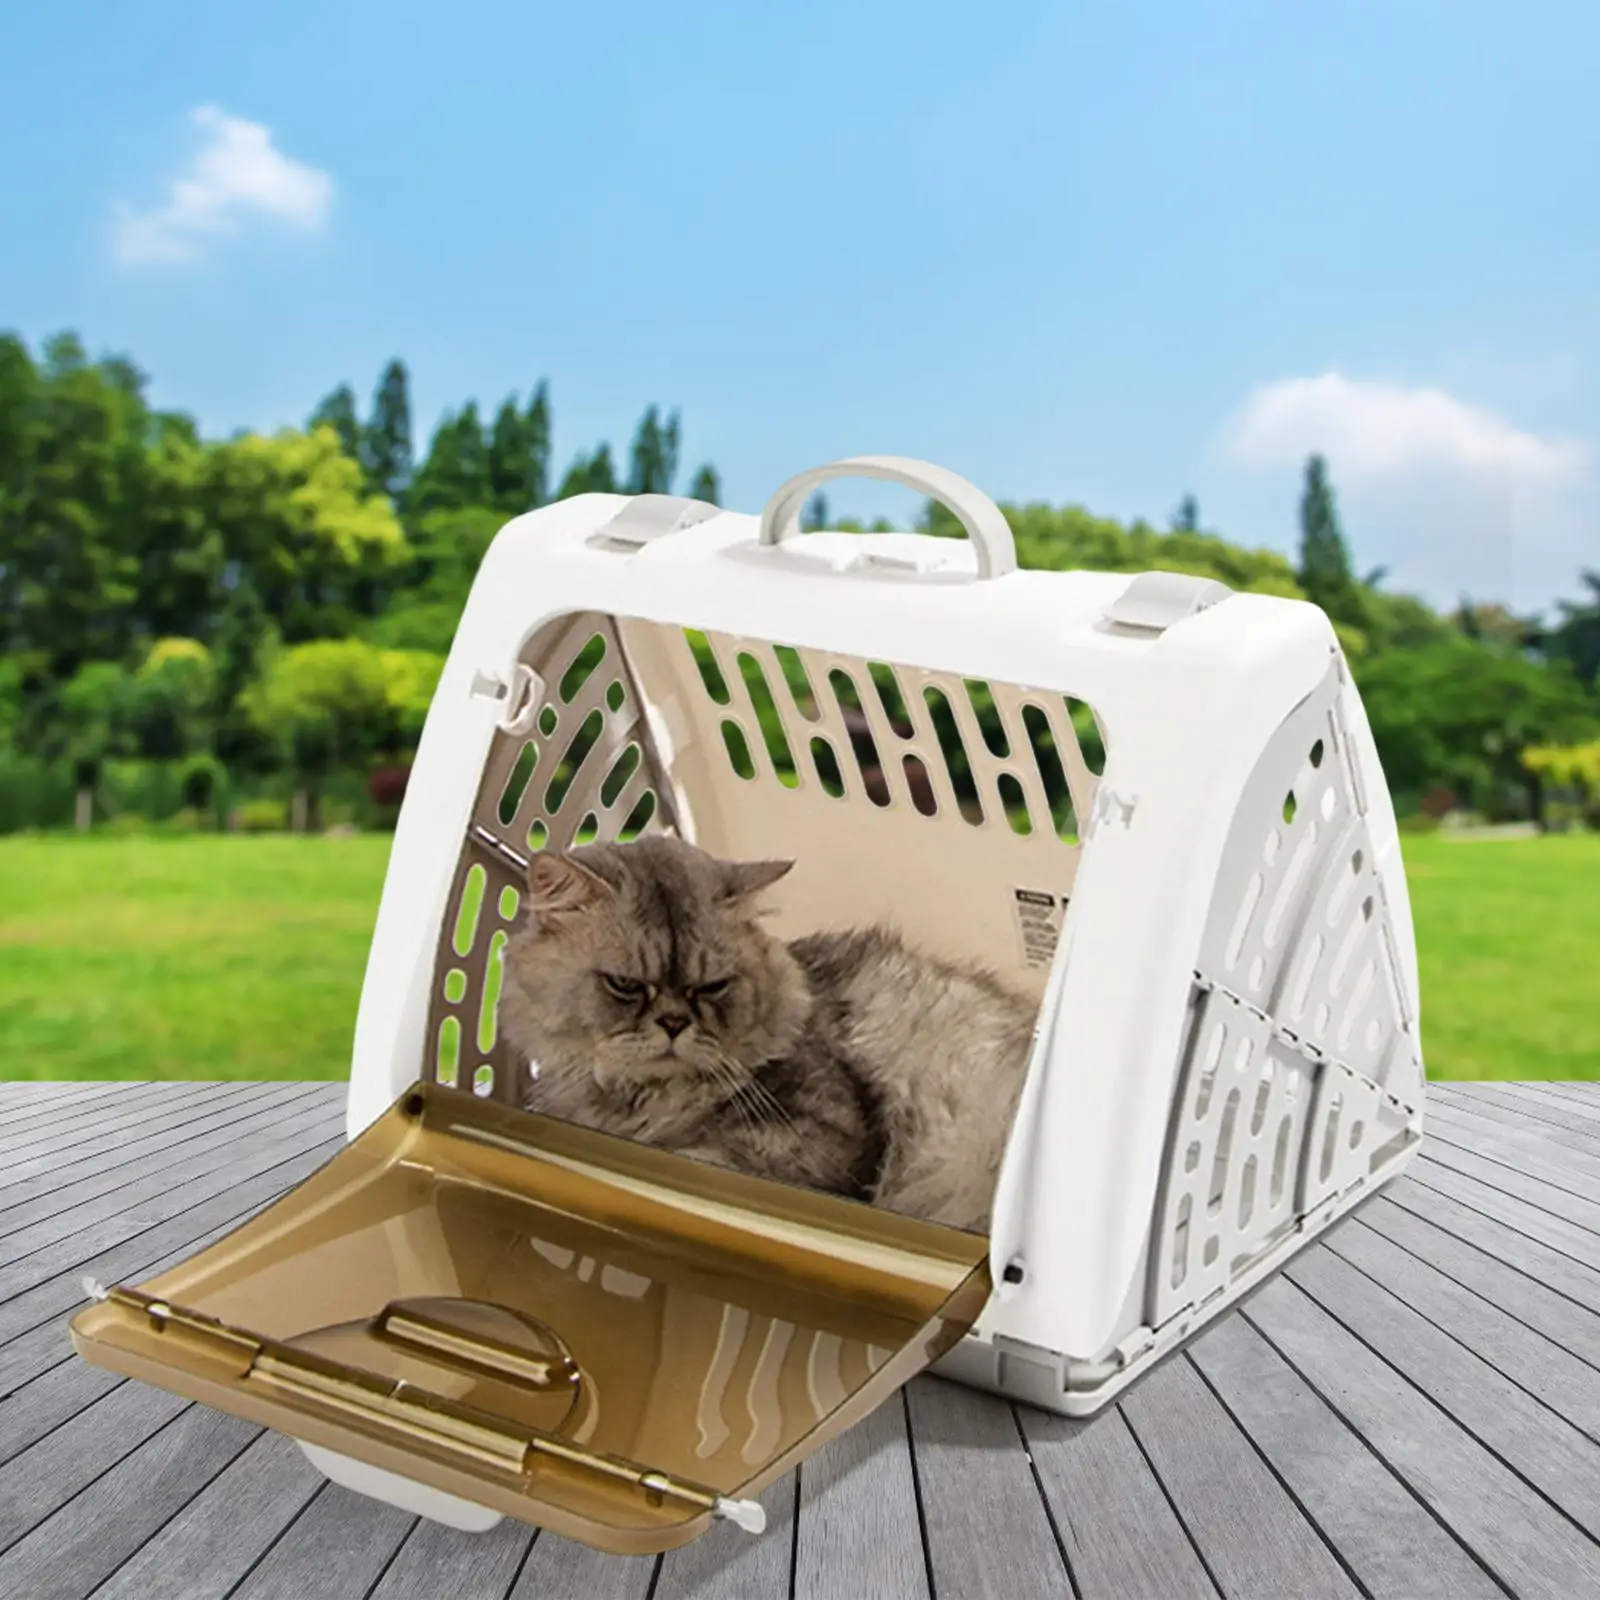 Foldable Cat Carrier Dog Travel Bag Puppy Kitten Carrier Carrying Case Large Space Handbag Box for Pets Grooming Travel Outdoor